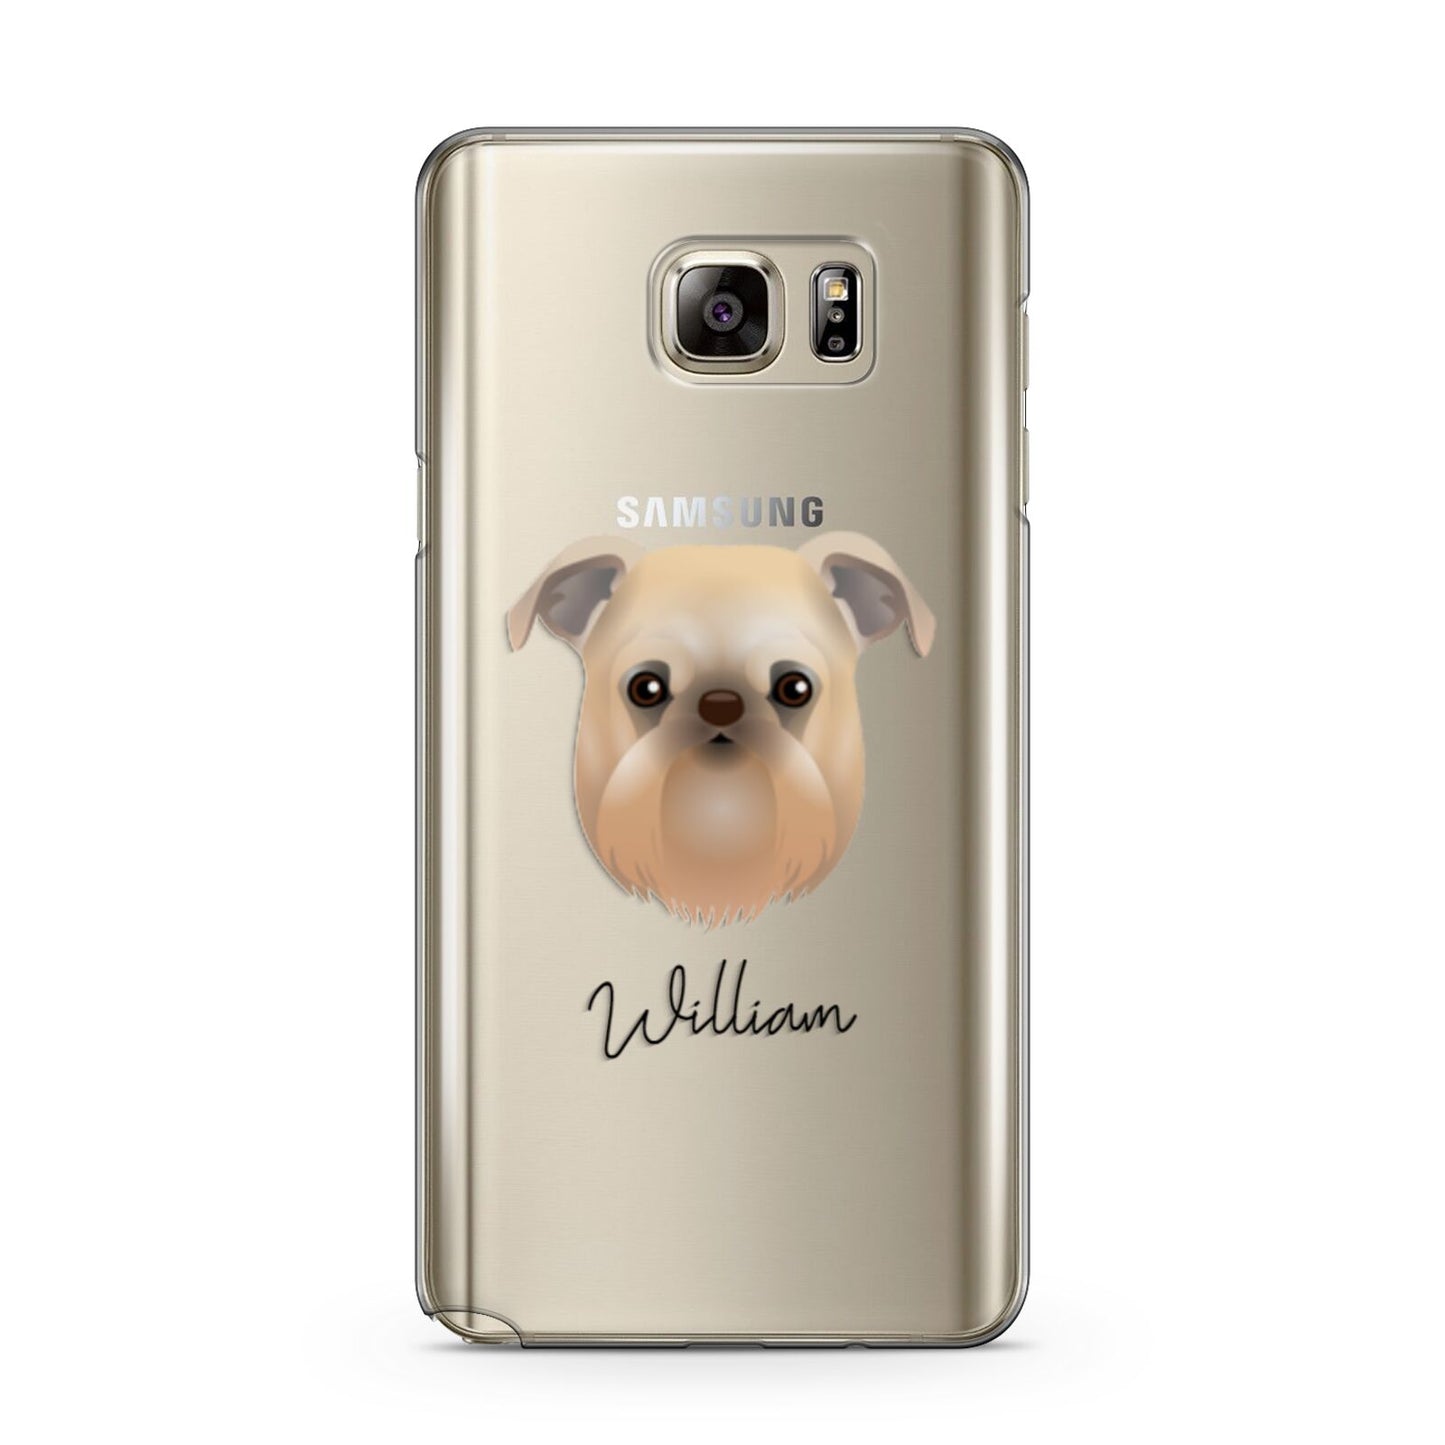 Griffon Bruxellois Personalised Samsung Galaxy Note 5 Case